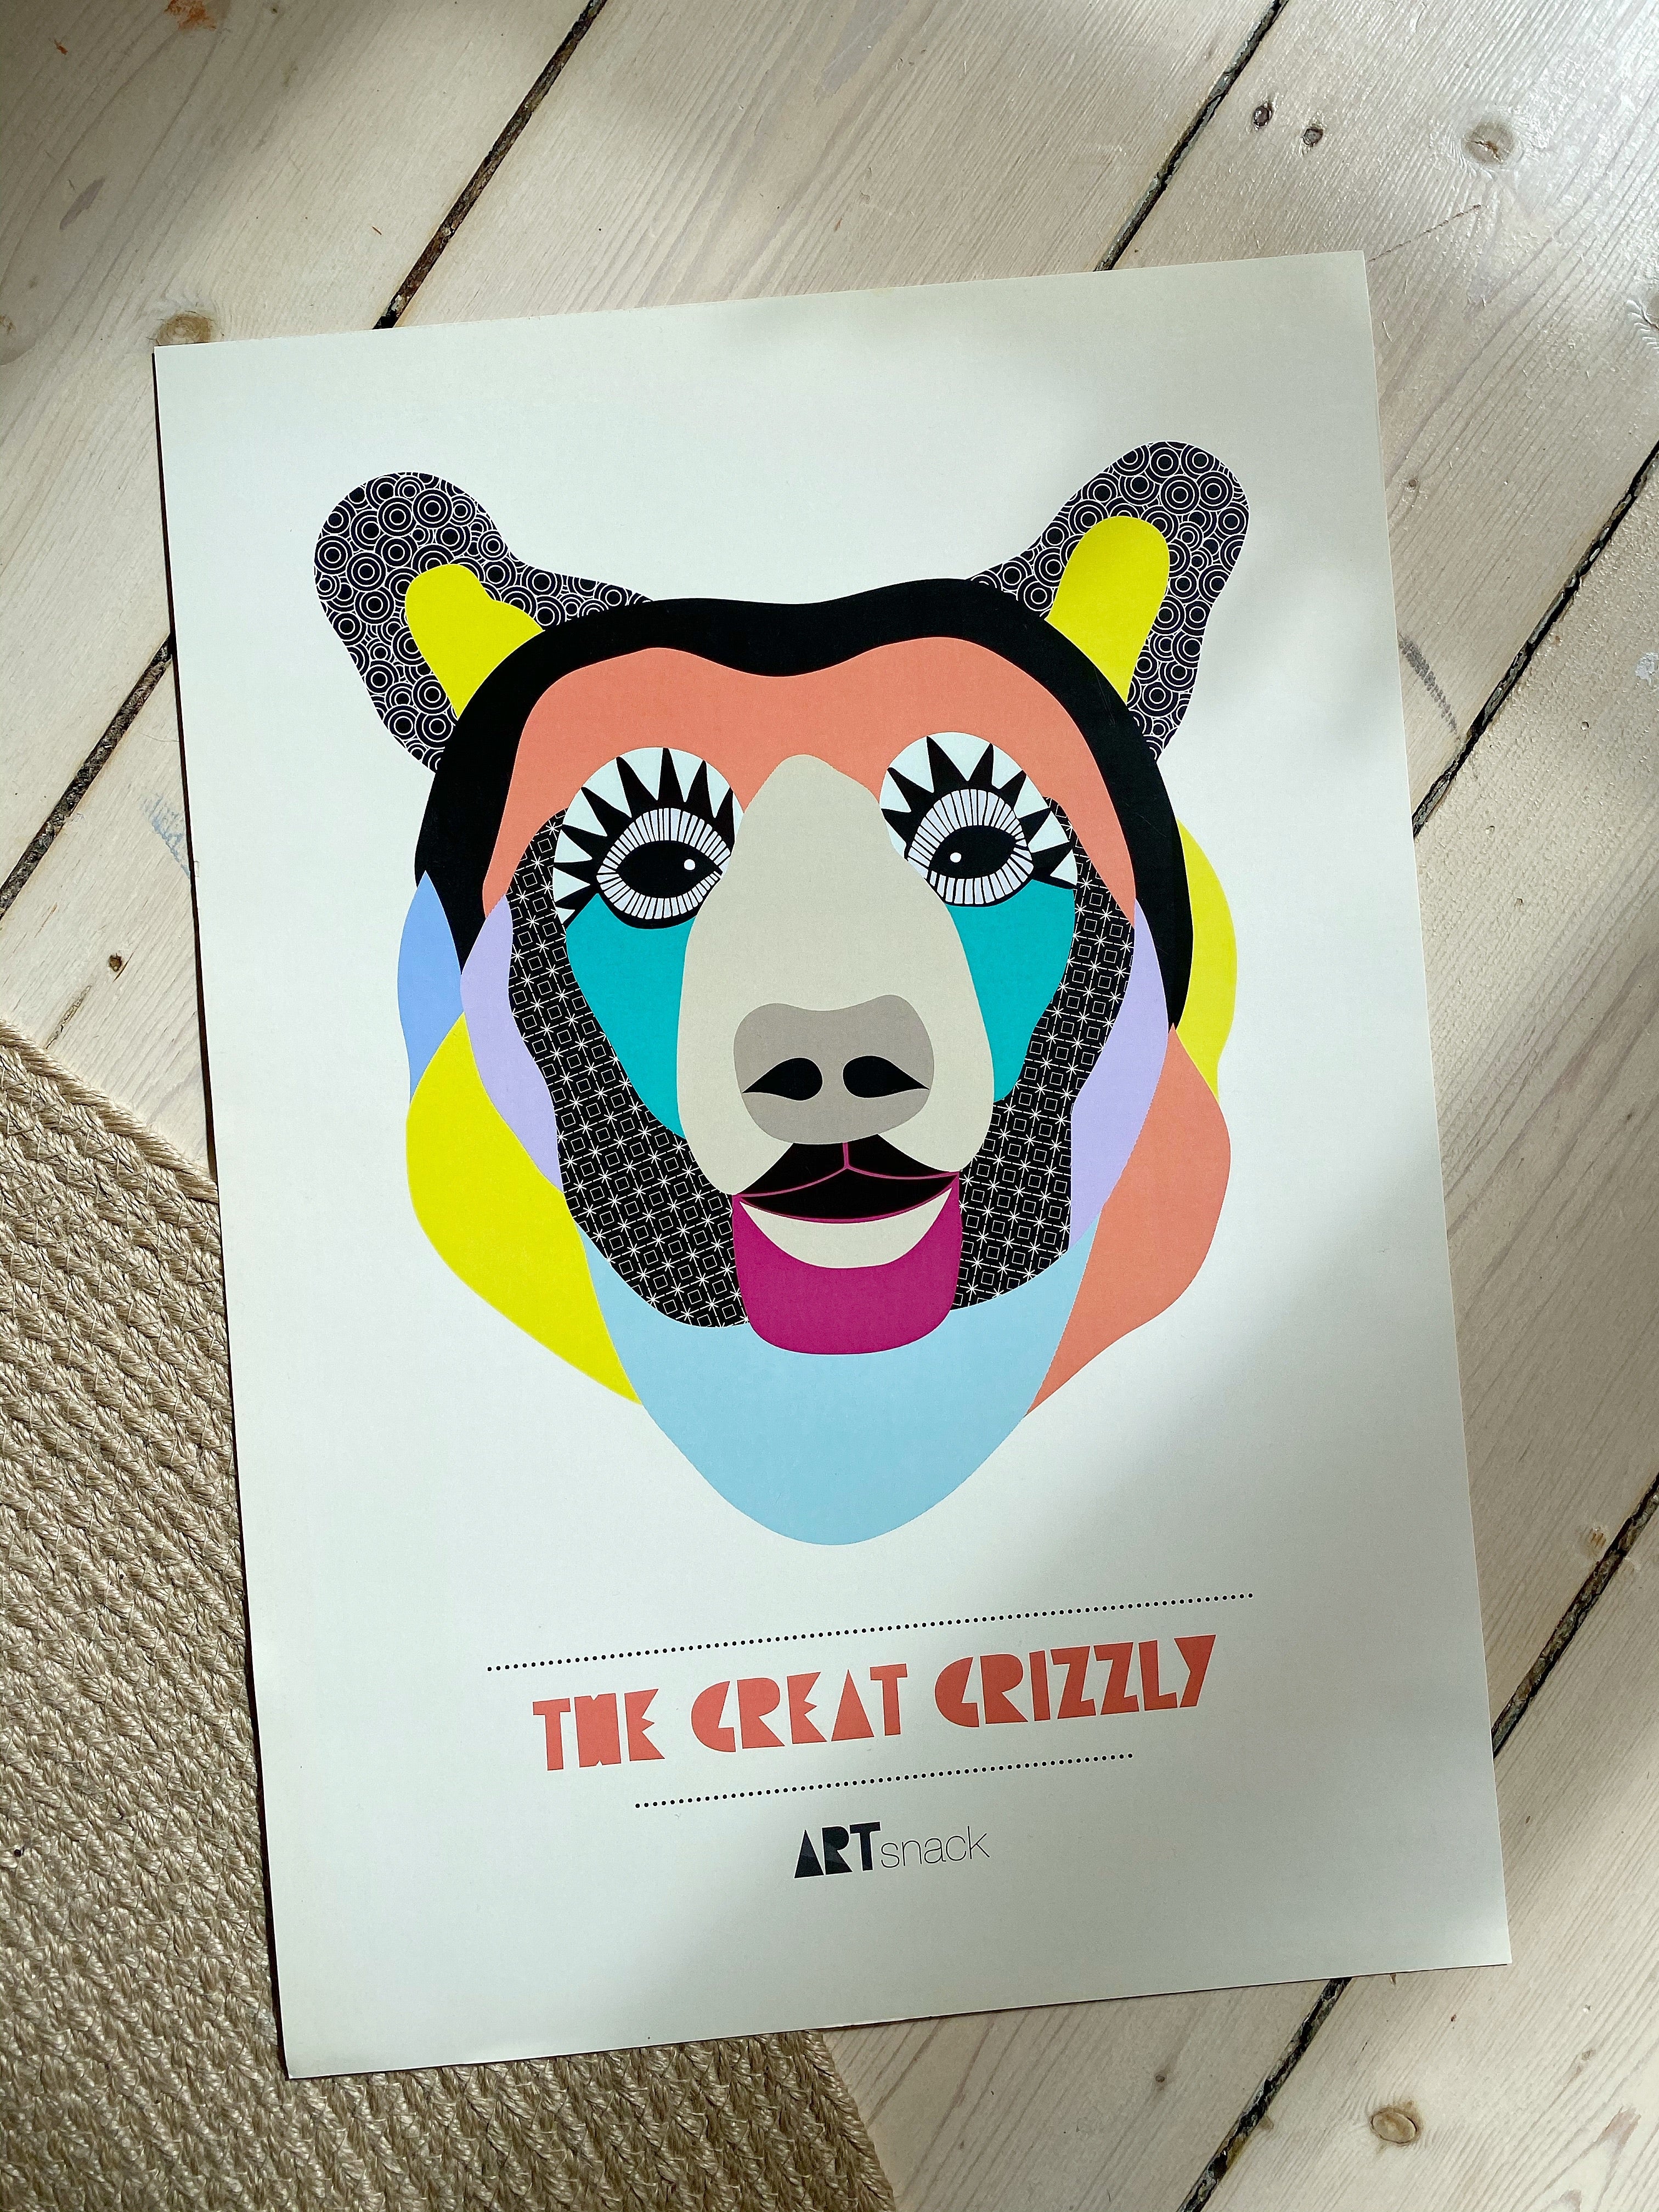 A3 print ‘The Great Grizzly’